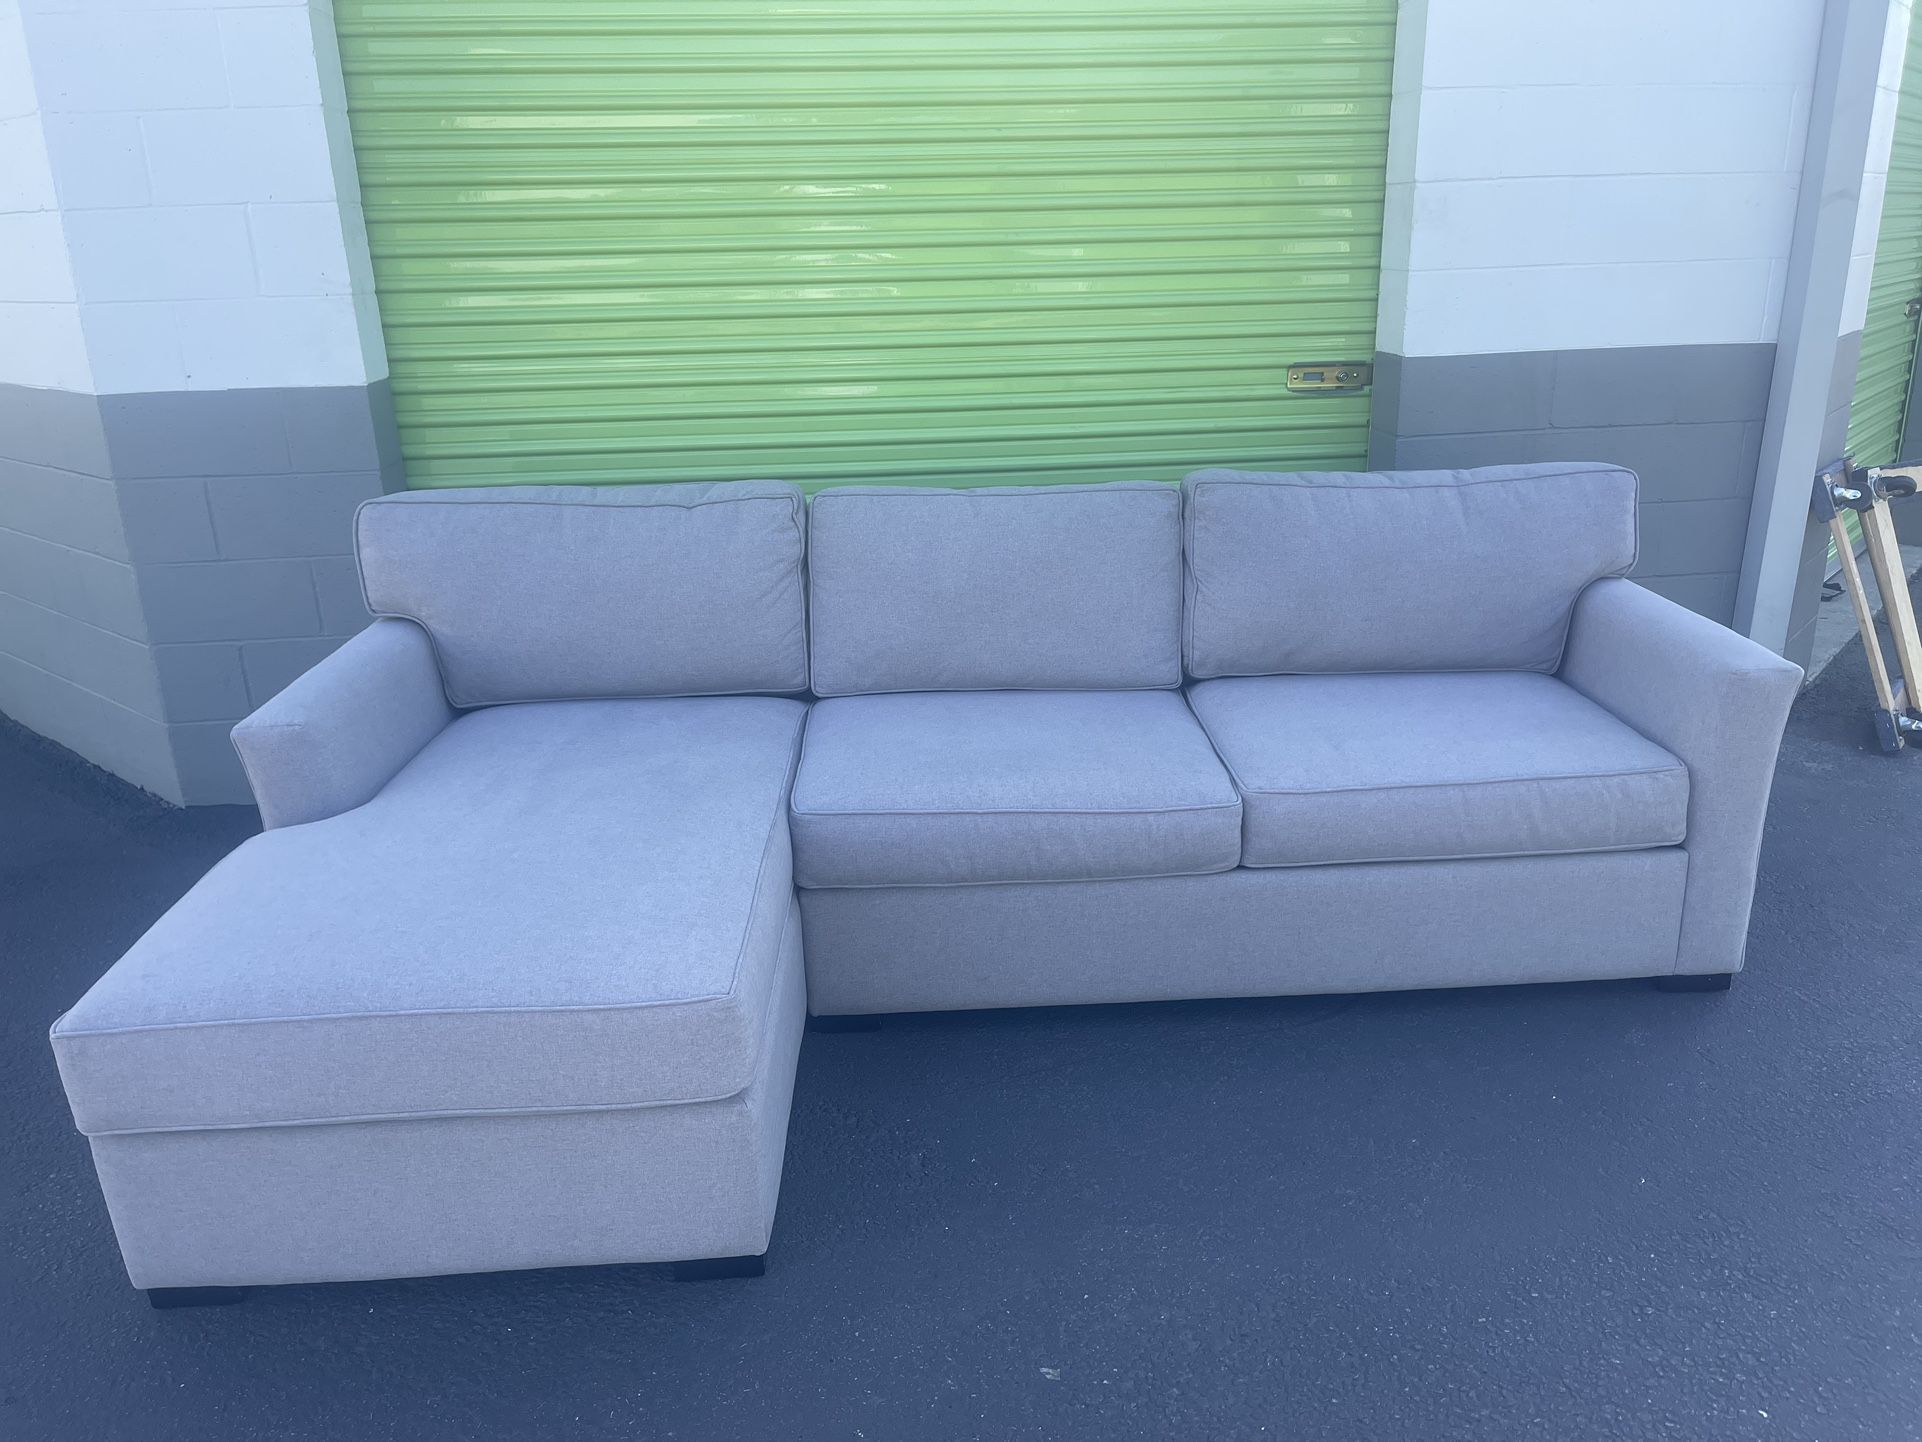 Light Gray Sectional Modular Sleeper Sectional - FREE DELIVERY 🚚😮‍💨